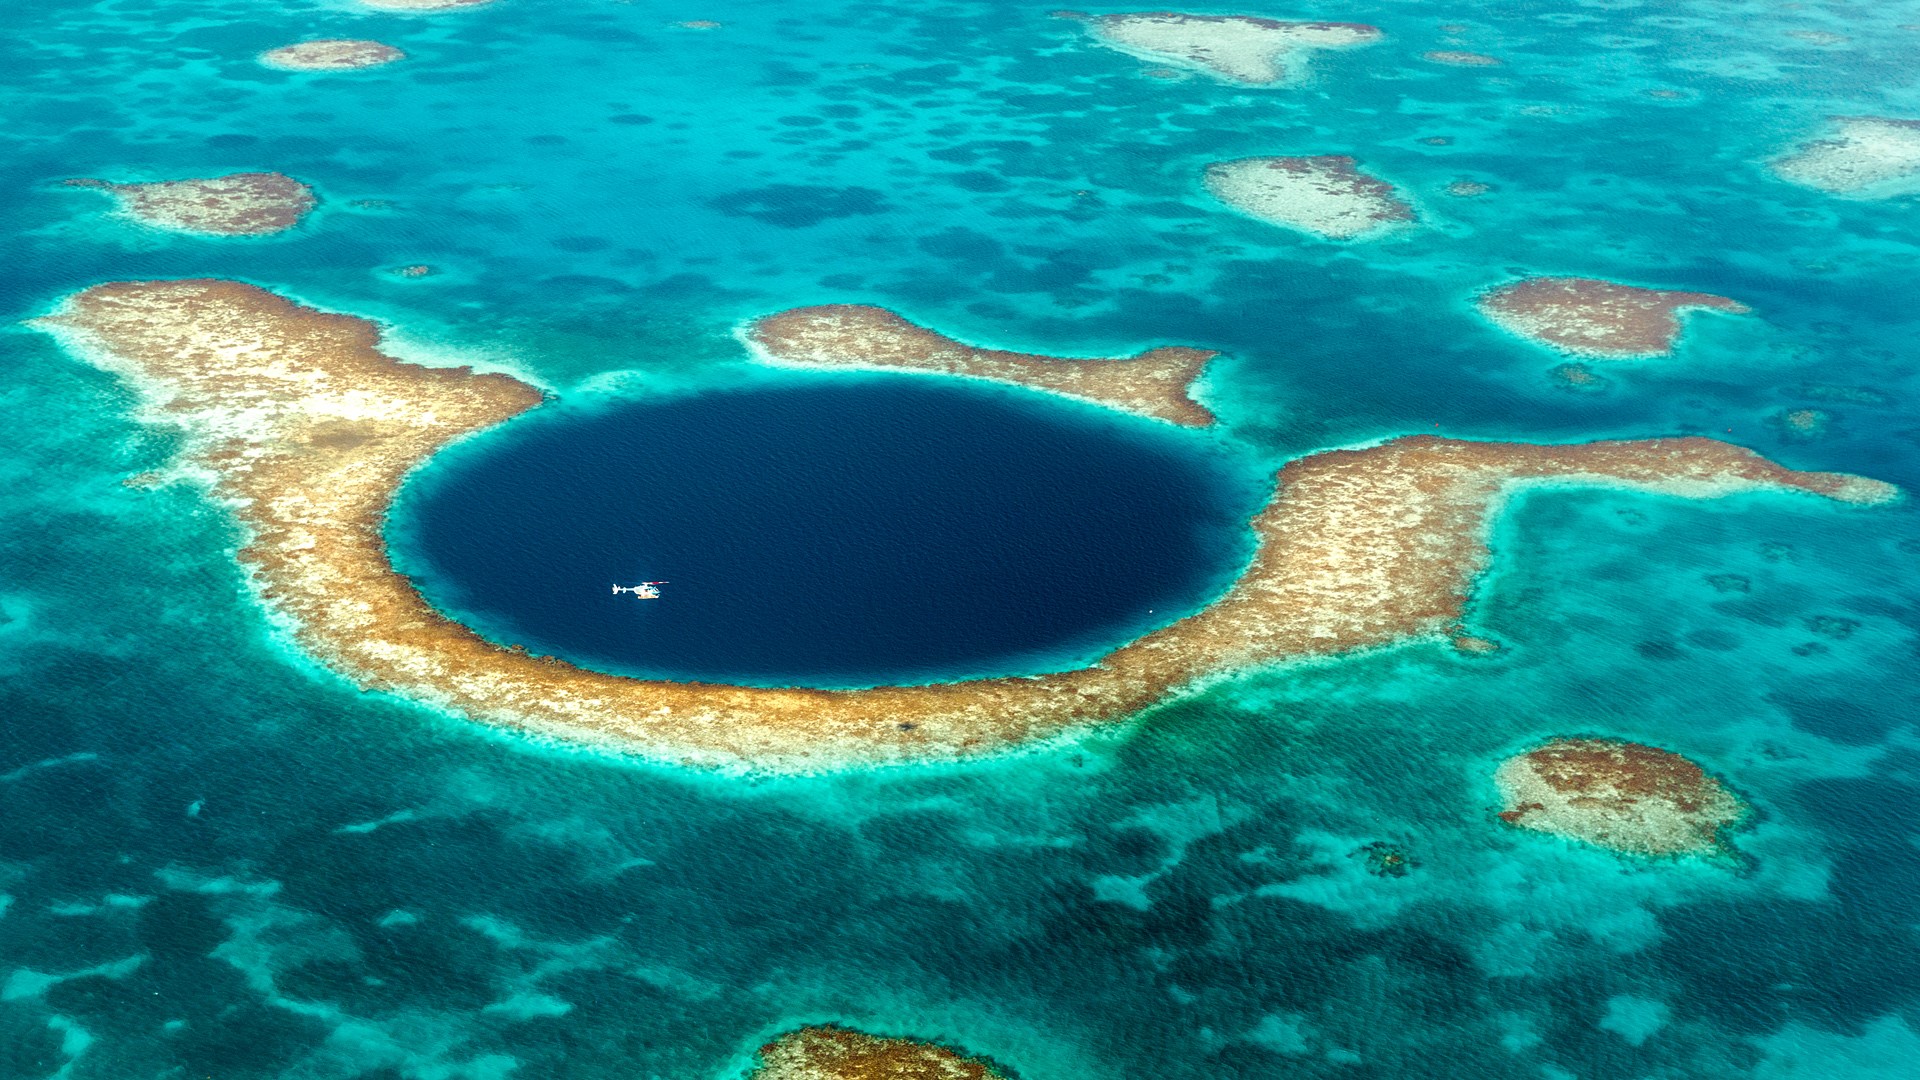 Helicopter Above The Great Blue Hole Belize Barrier Reef Windows 10 Spotlight Images